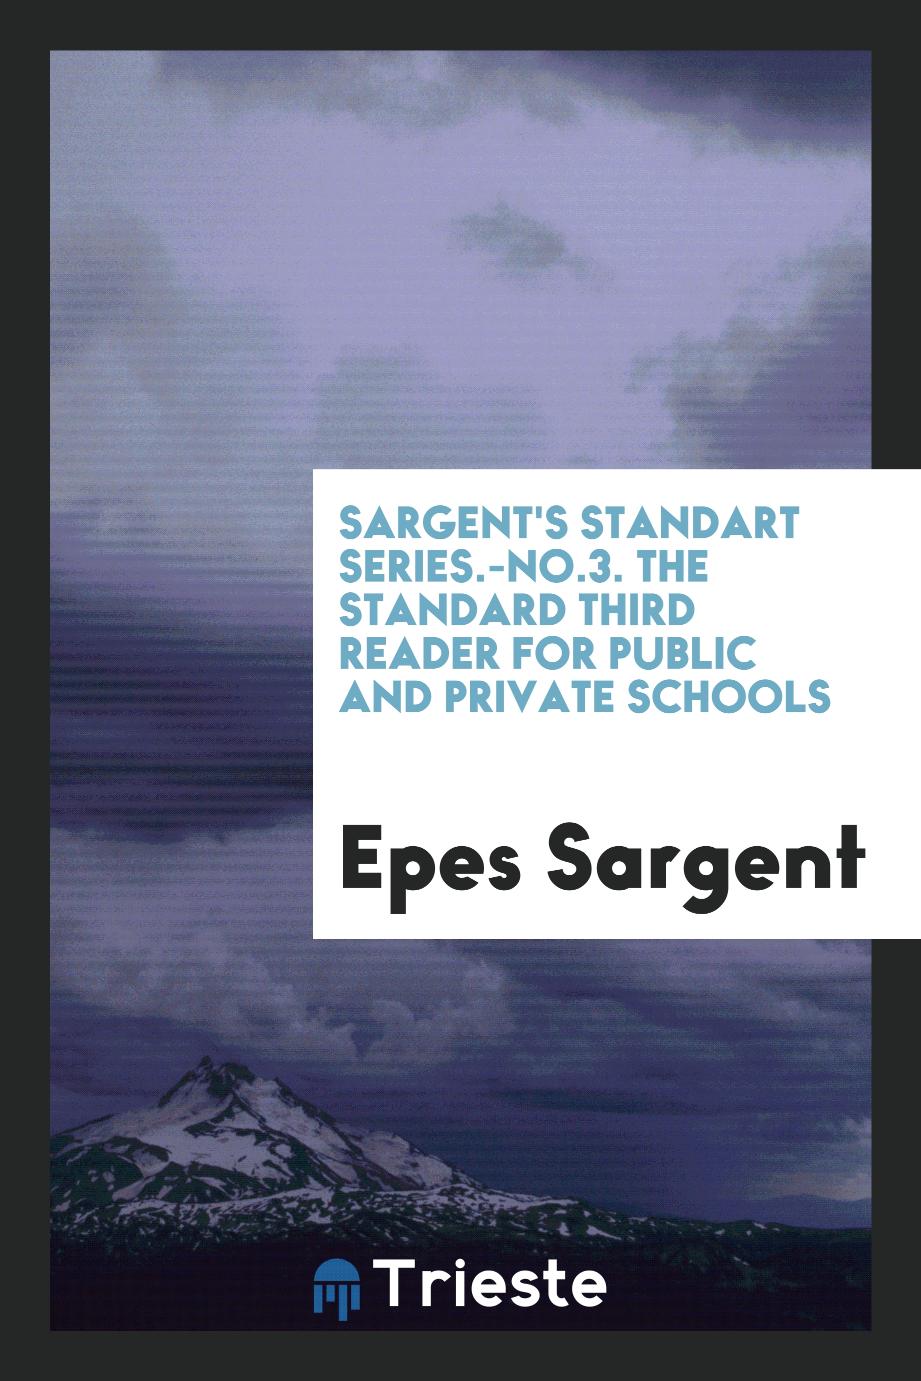 Sargent's Standart Series.-No.3. The Standard Third Reader for Public and Private Schools